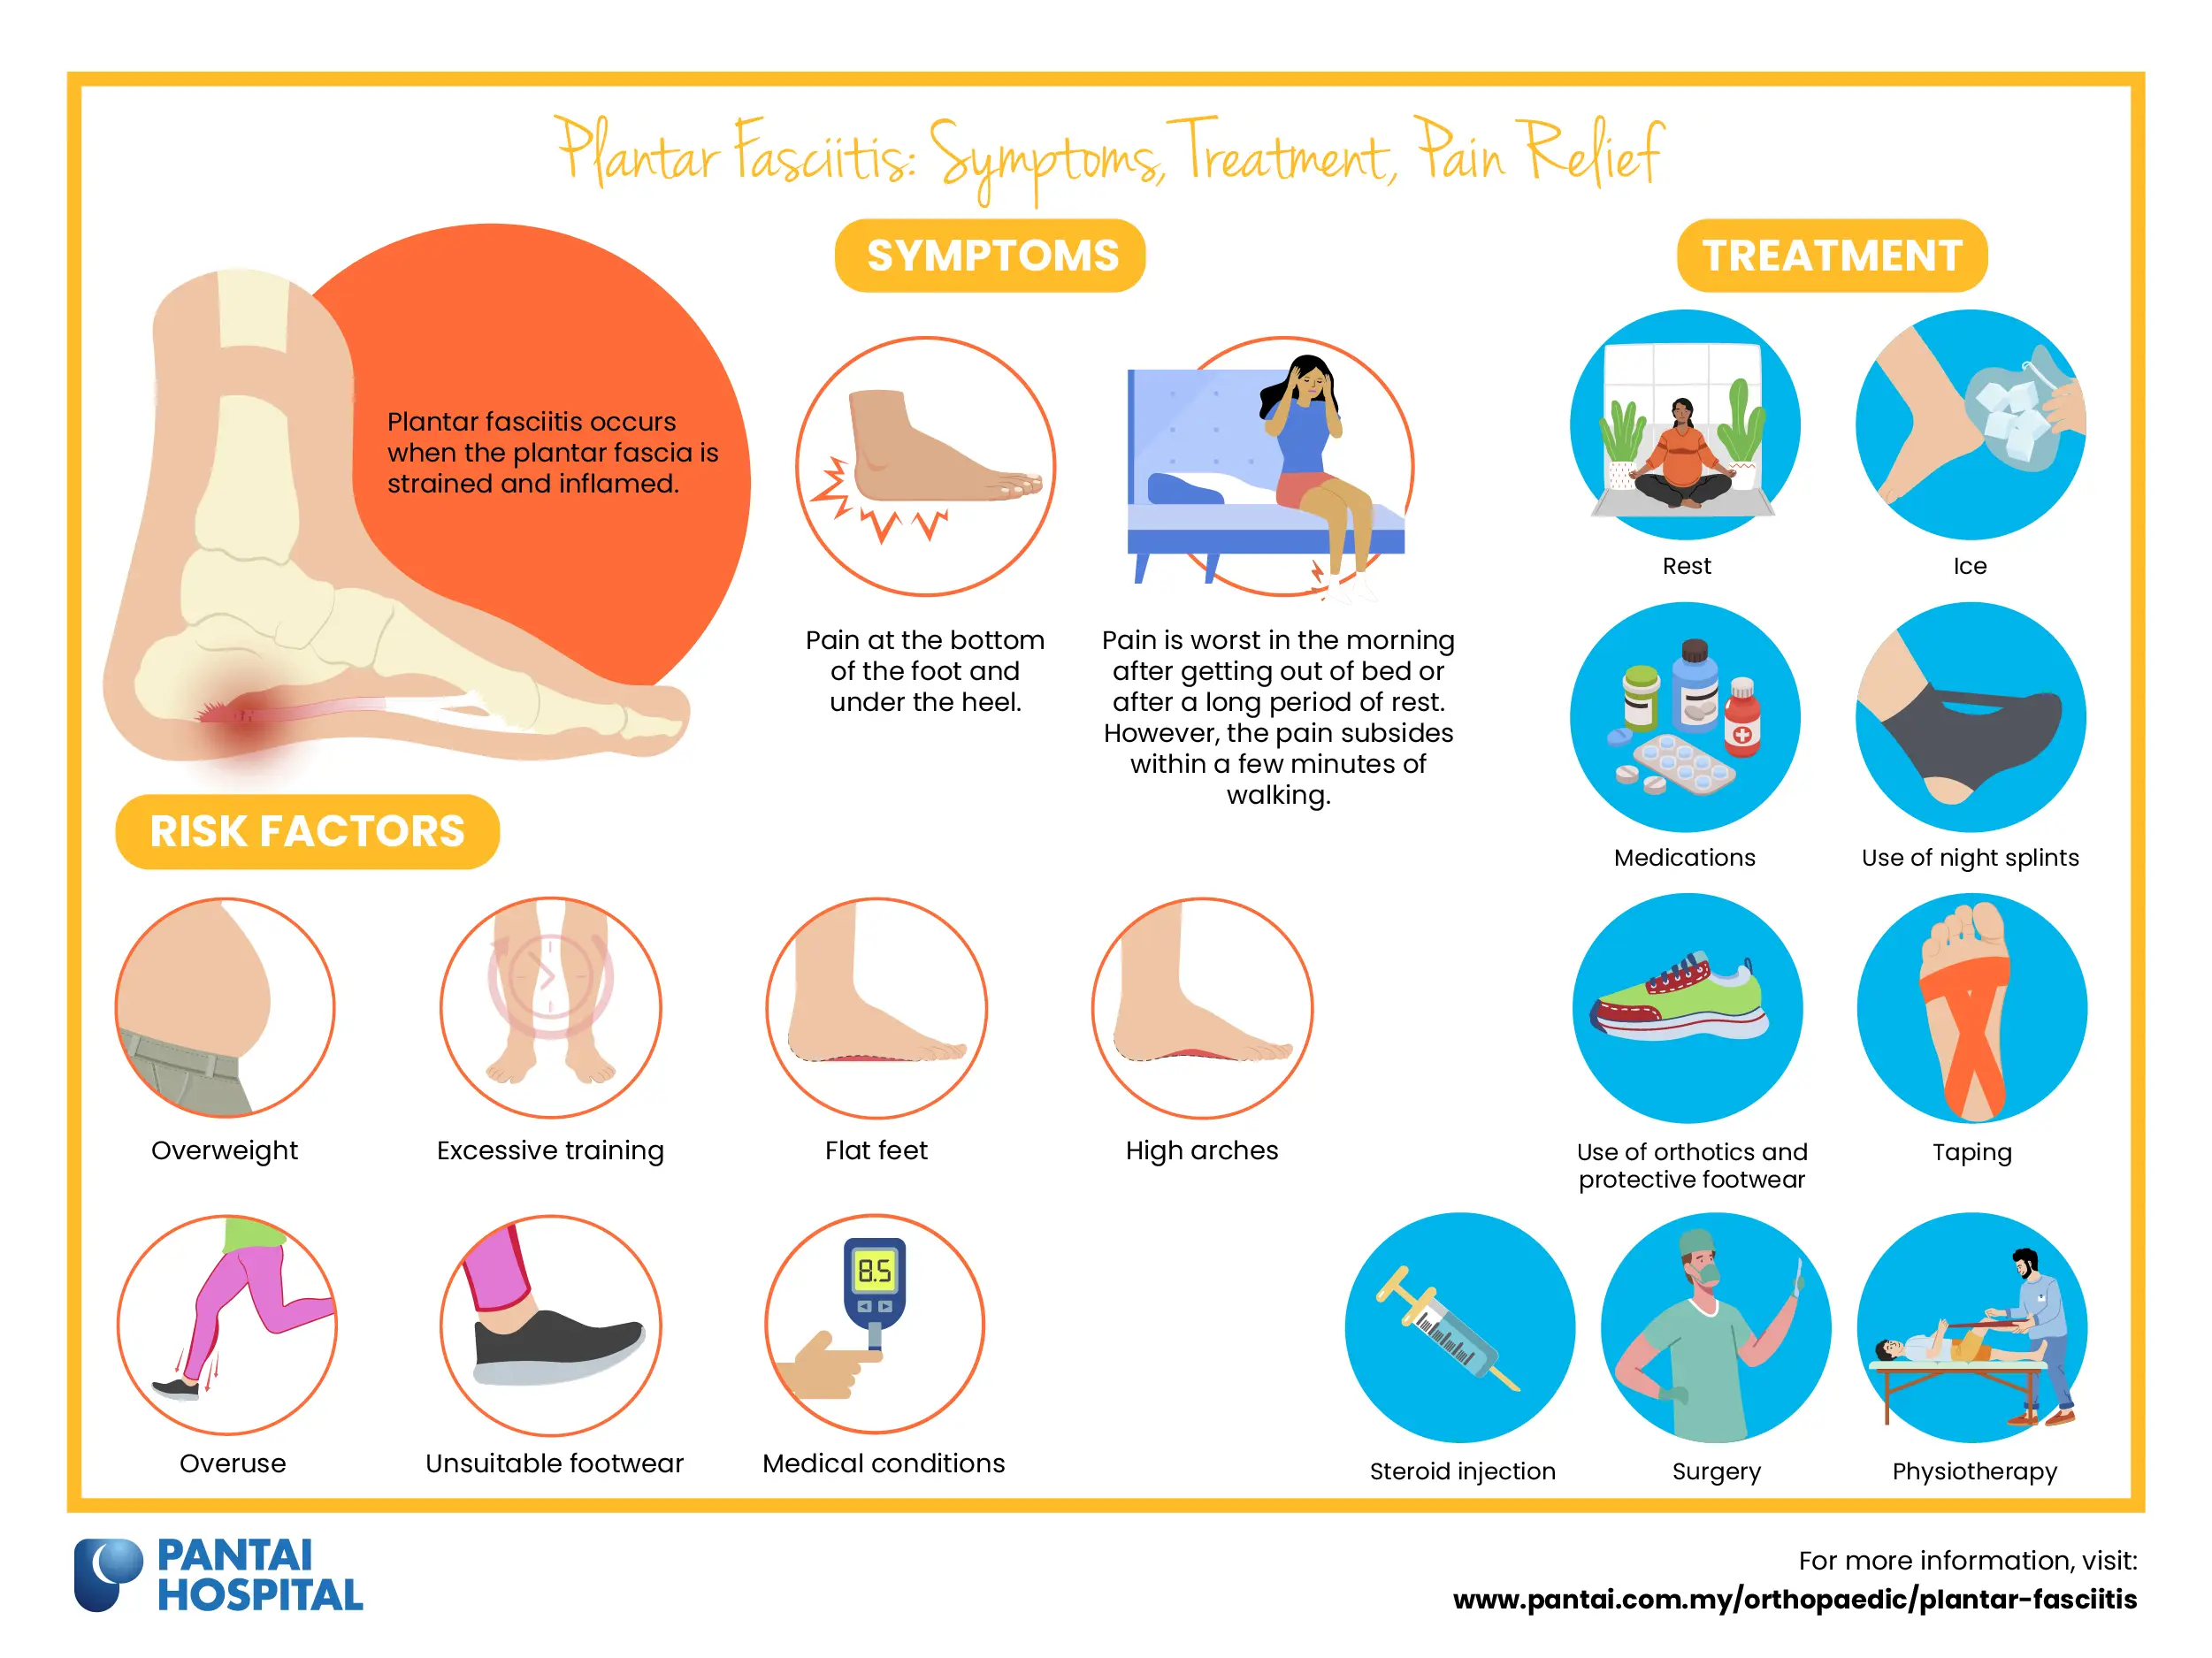 Infographic showing symptoms, risk factors, and treatments available for plantar fasciitis in Malaysia